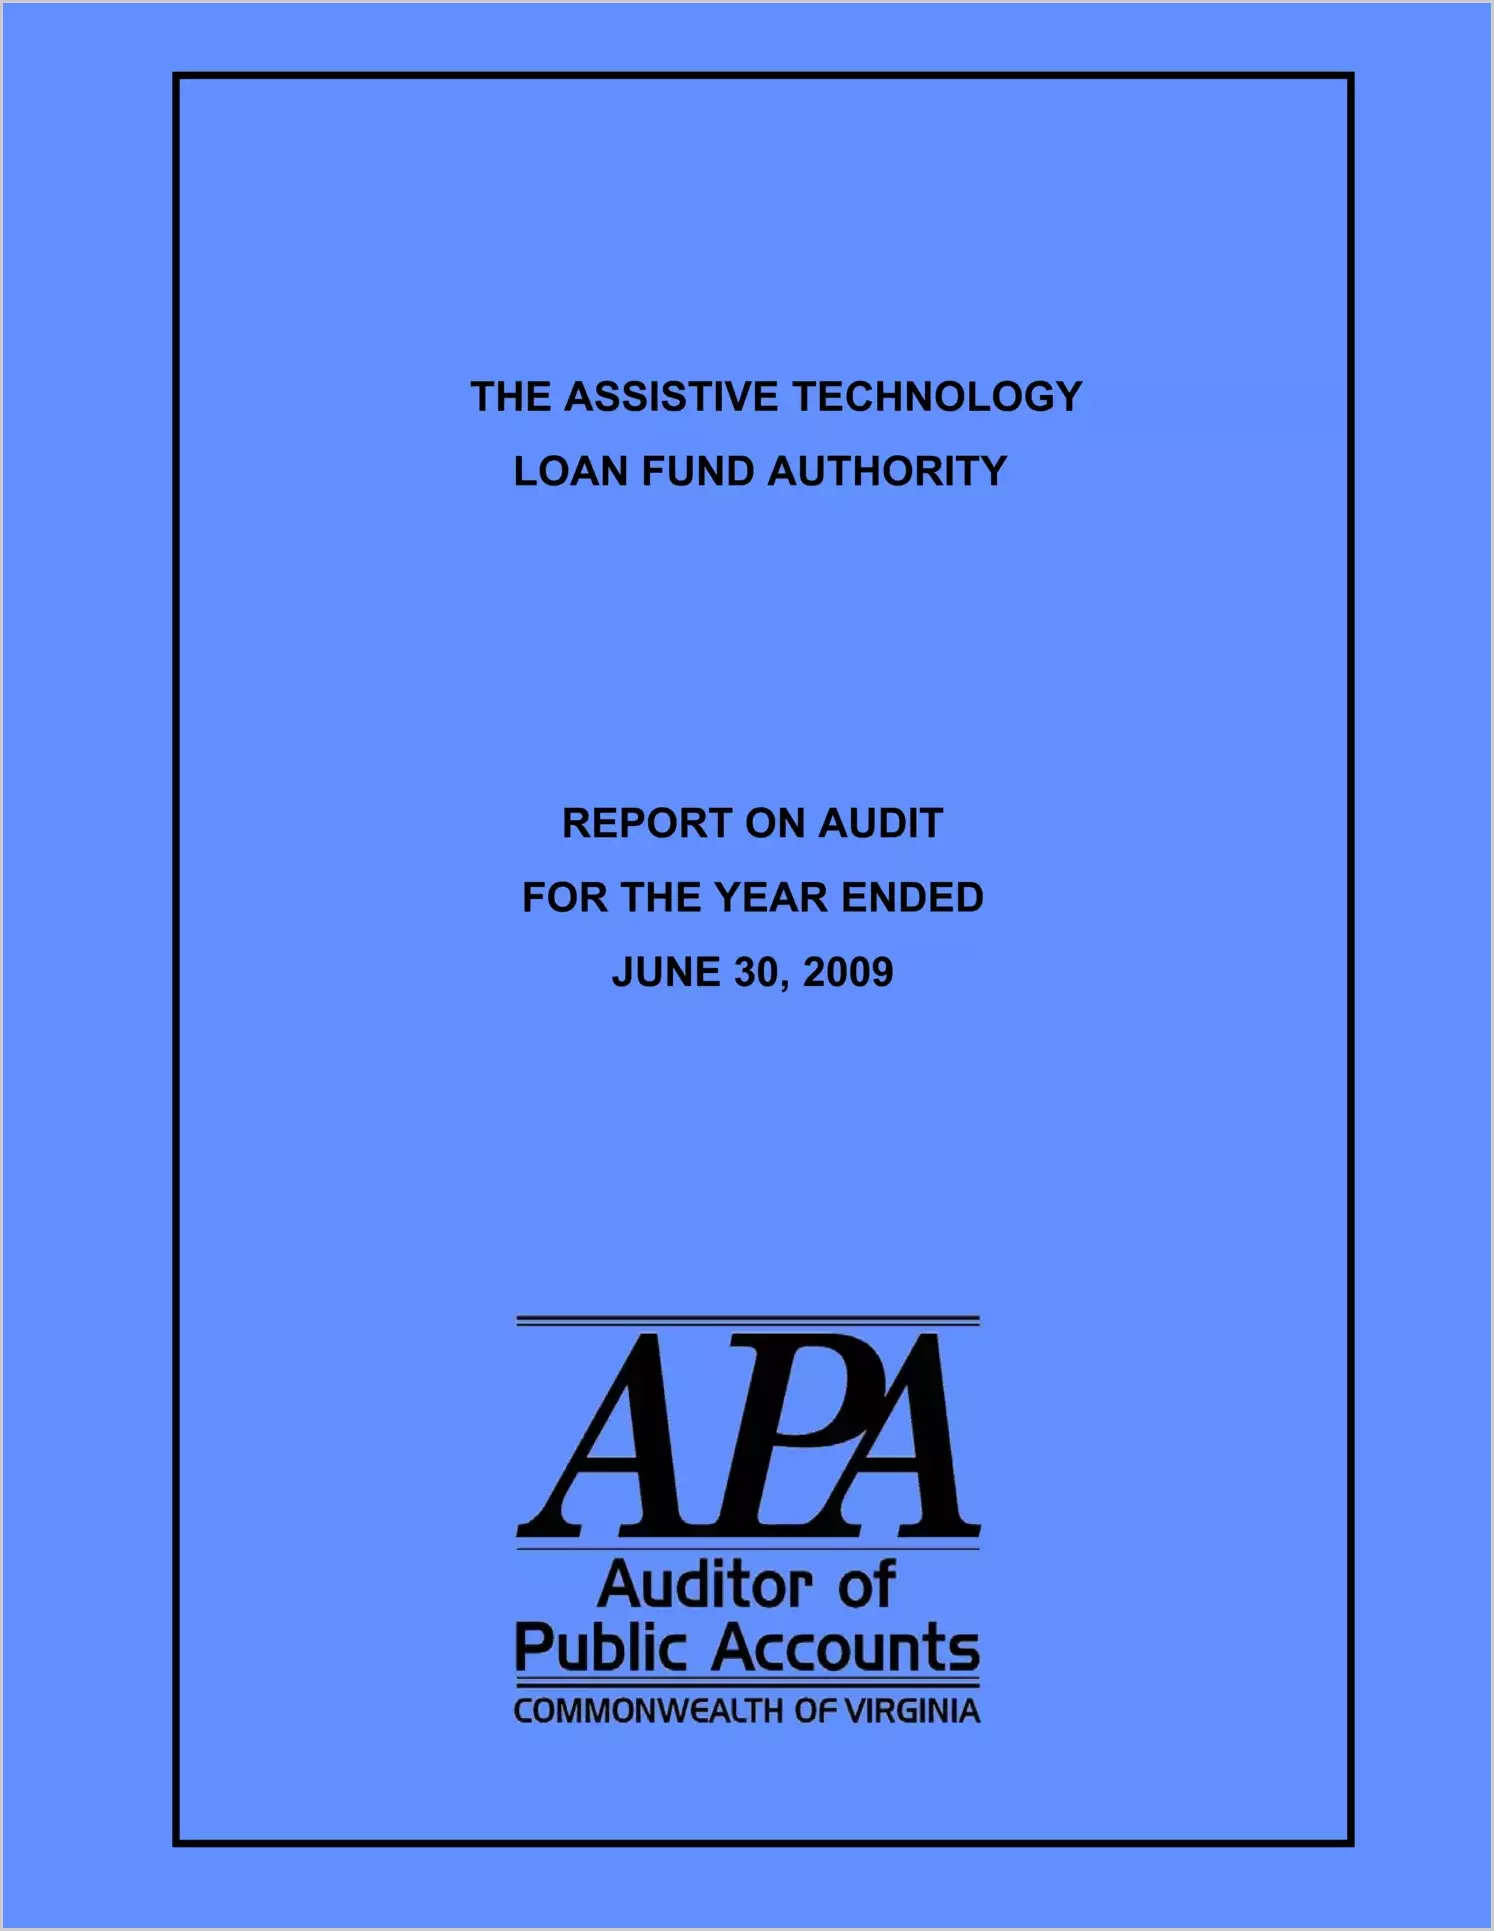 The Assistive Technology Loan Fund Authority report on audit for the year ended June 30, 2009